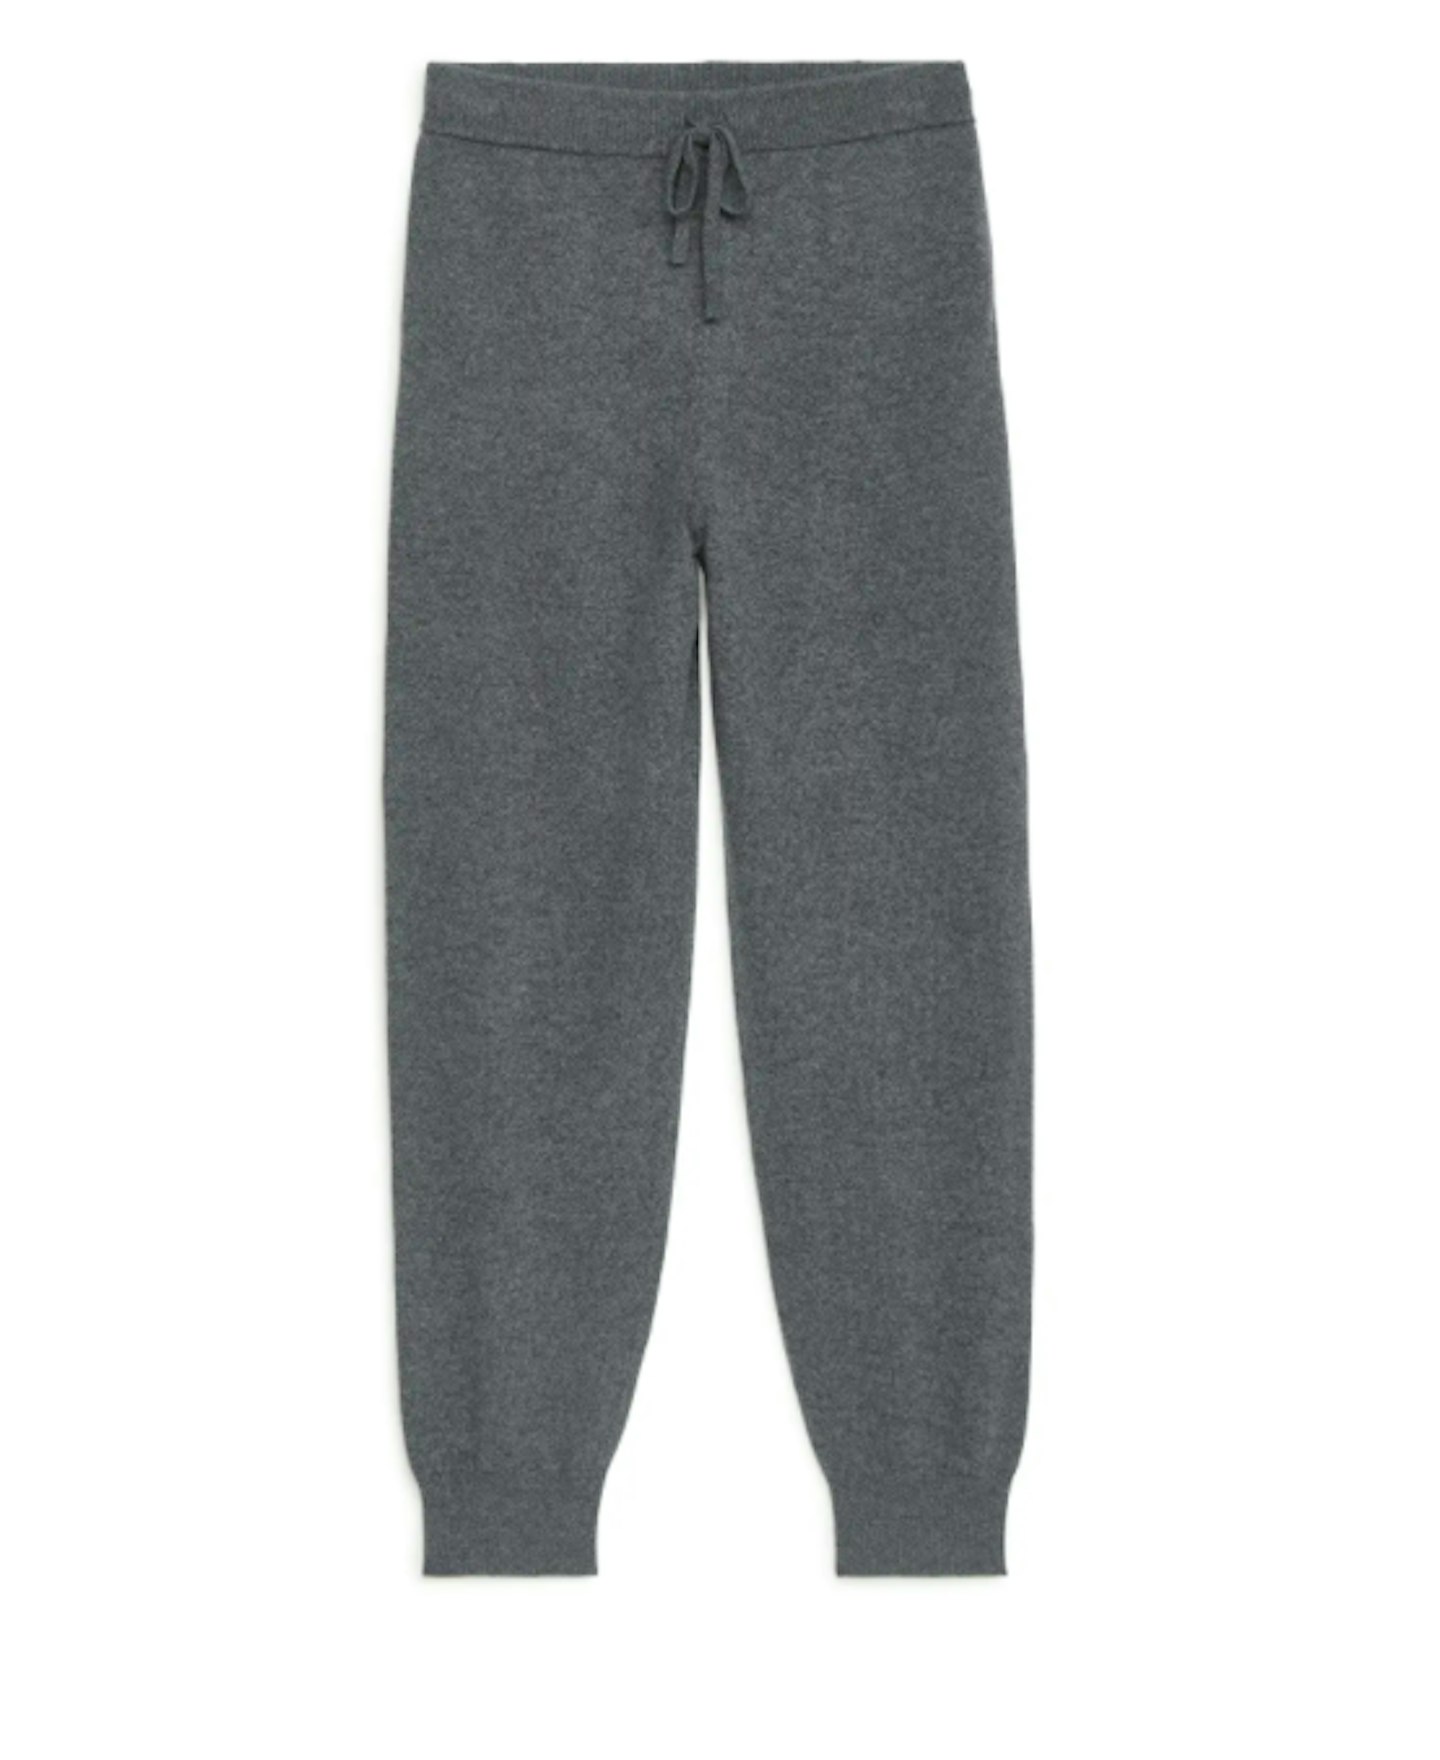 Arket, Knitted Cashmere Trousers, £125